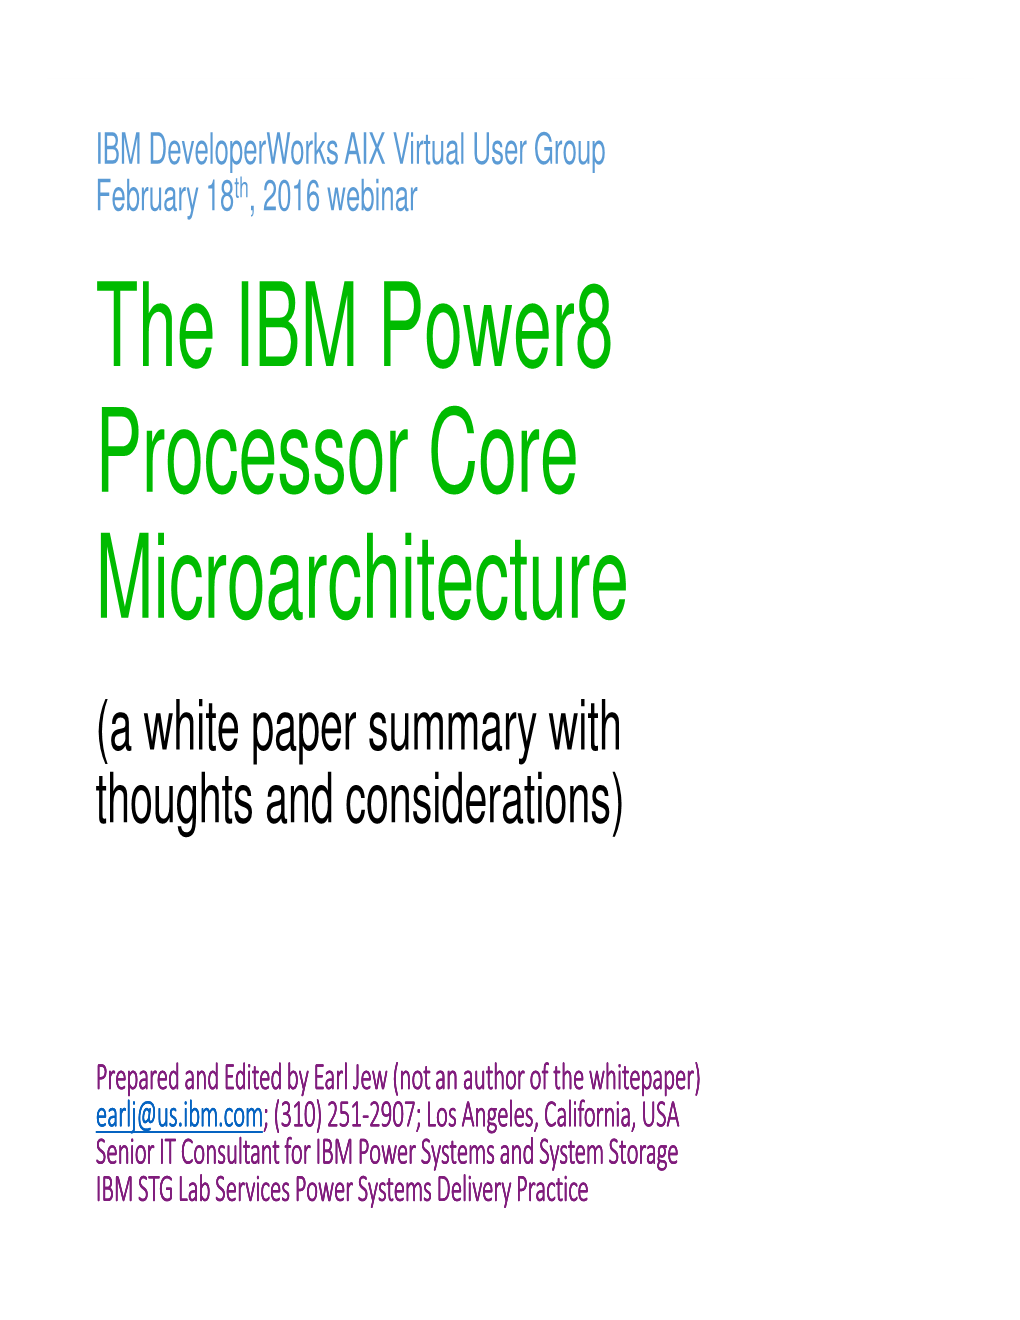 The IBM Power8 Processor Core Microarchitecture (A White Paper Summary with Thoughts and Considerations)